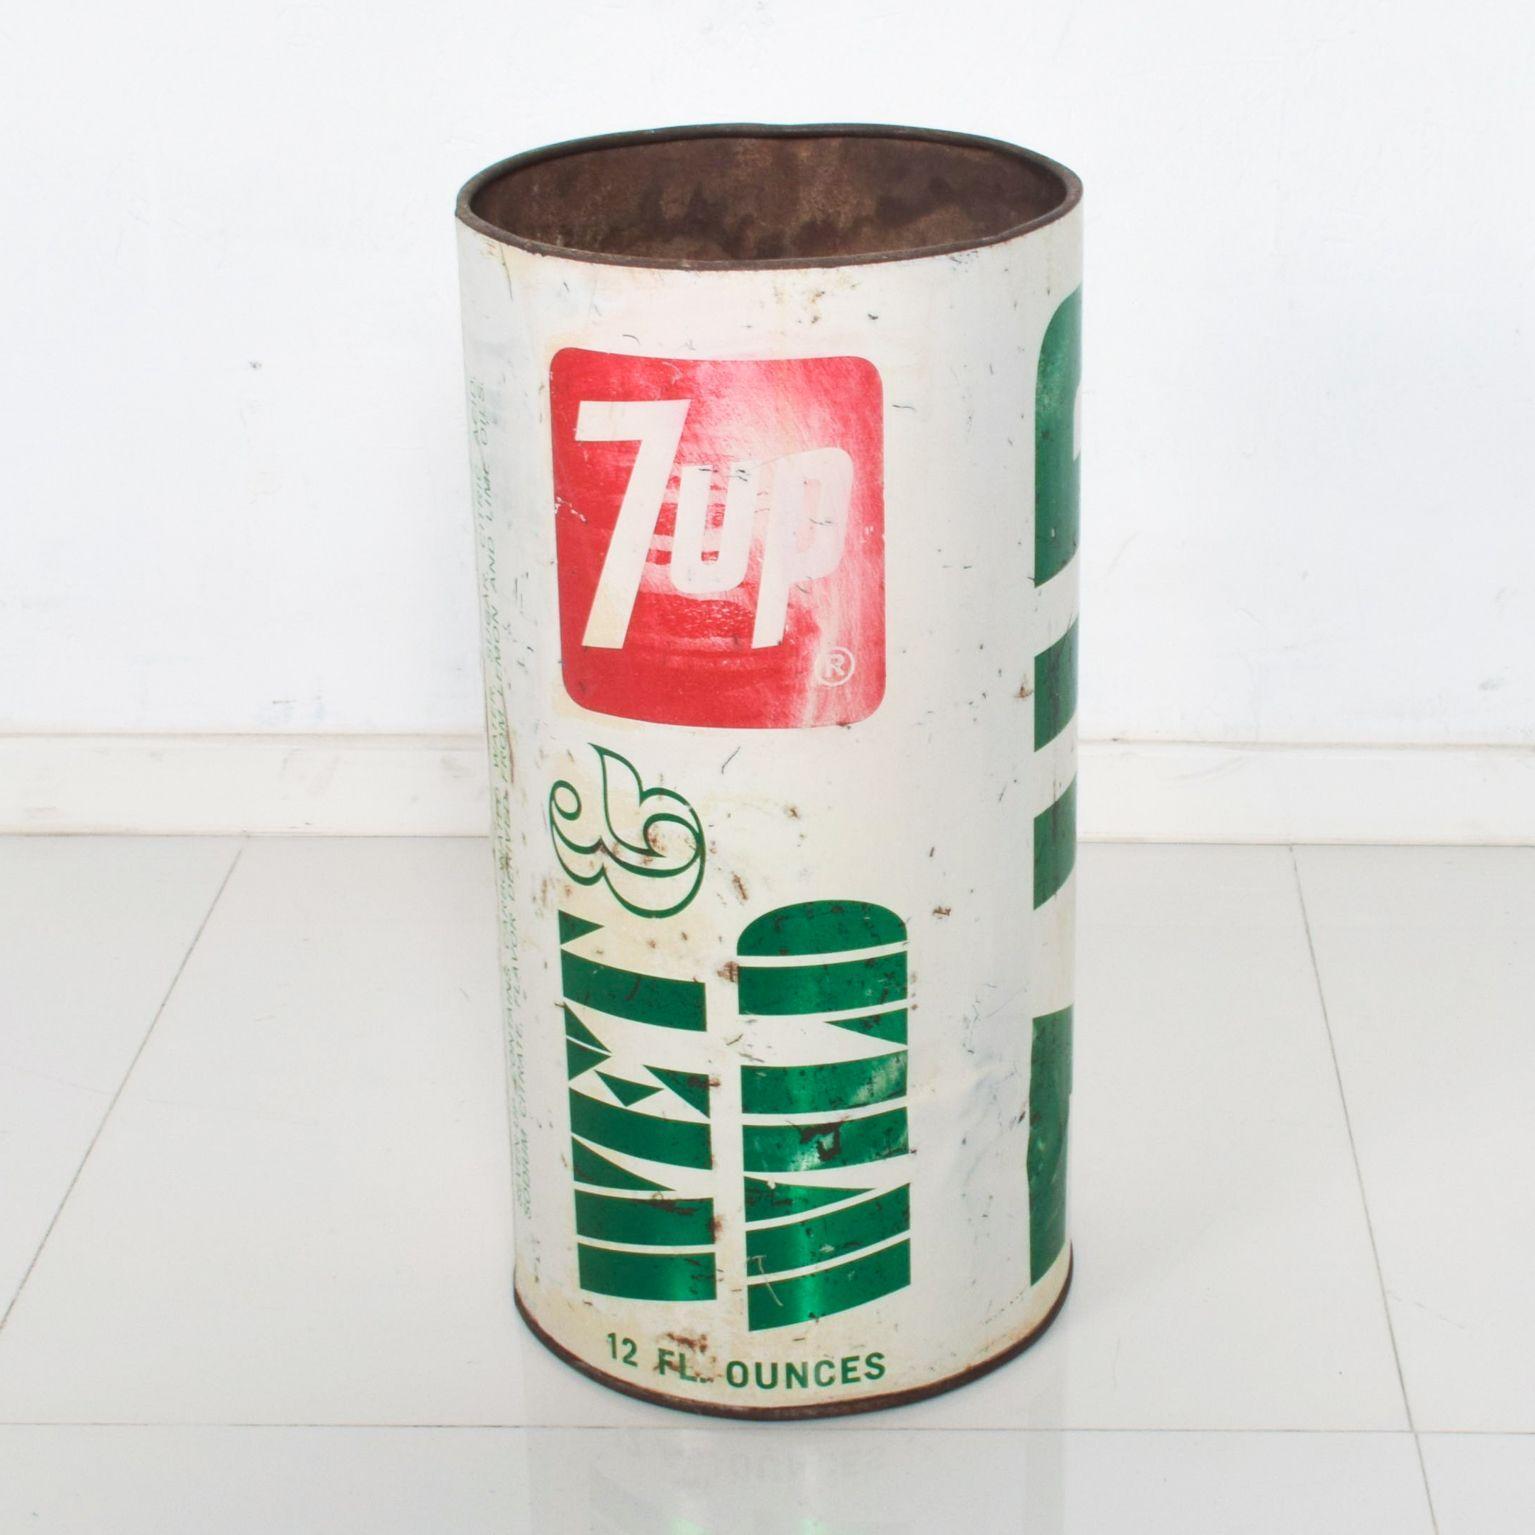 For fun: Vintage 7up wet & wild trash can 1970s metal soda collectible advertisement garbage can 7 up logo soda can trash can rustic pop Art Decor

Andy Warhol Pop Art style decor

Dimensions: 19 1/4